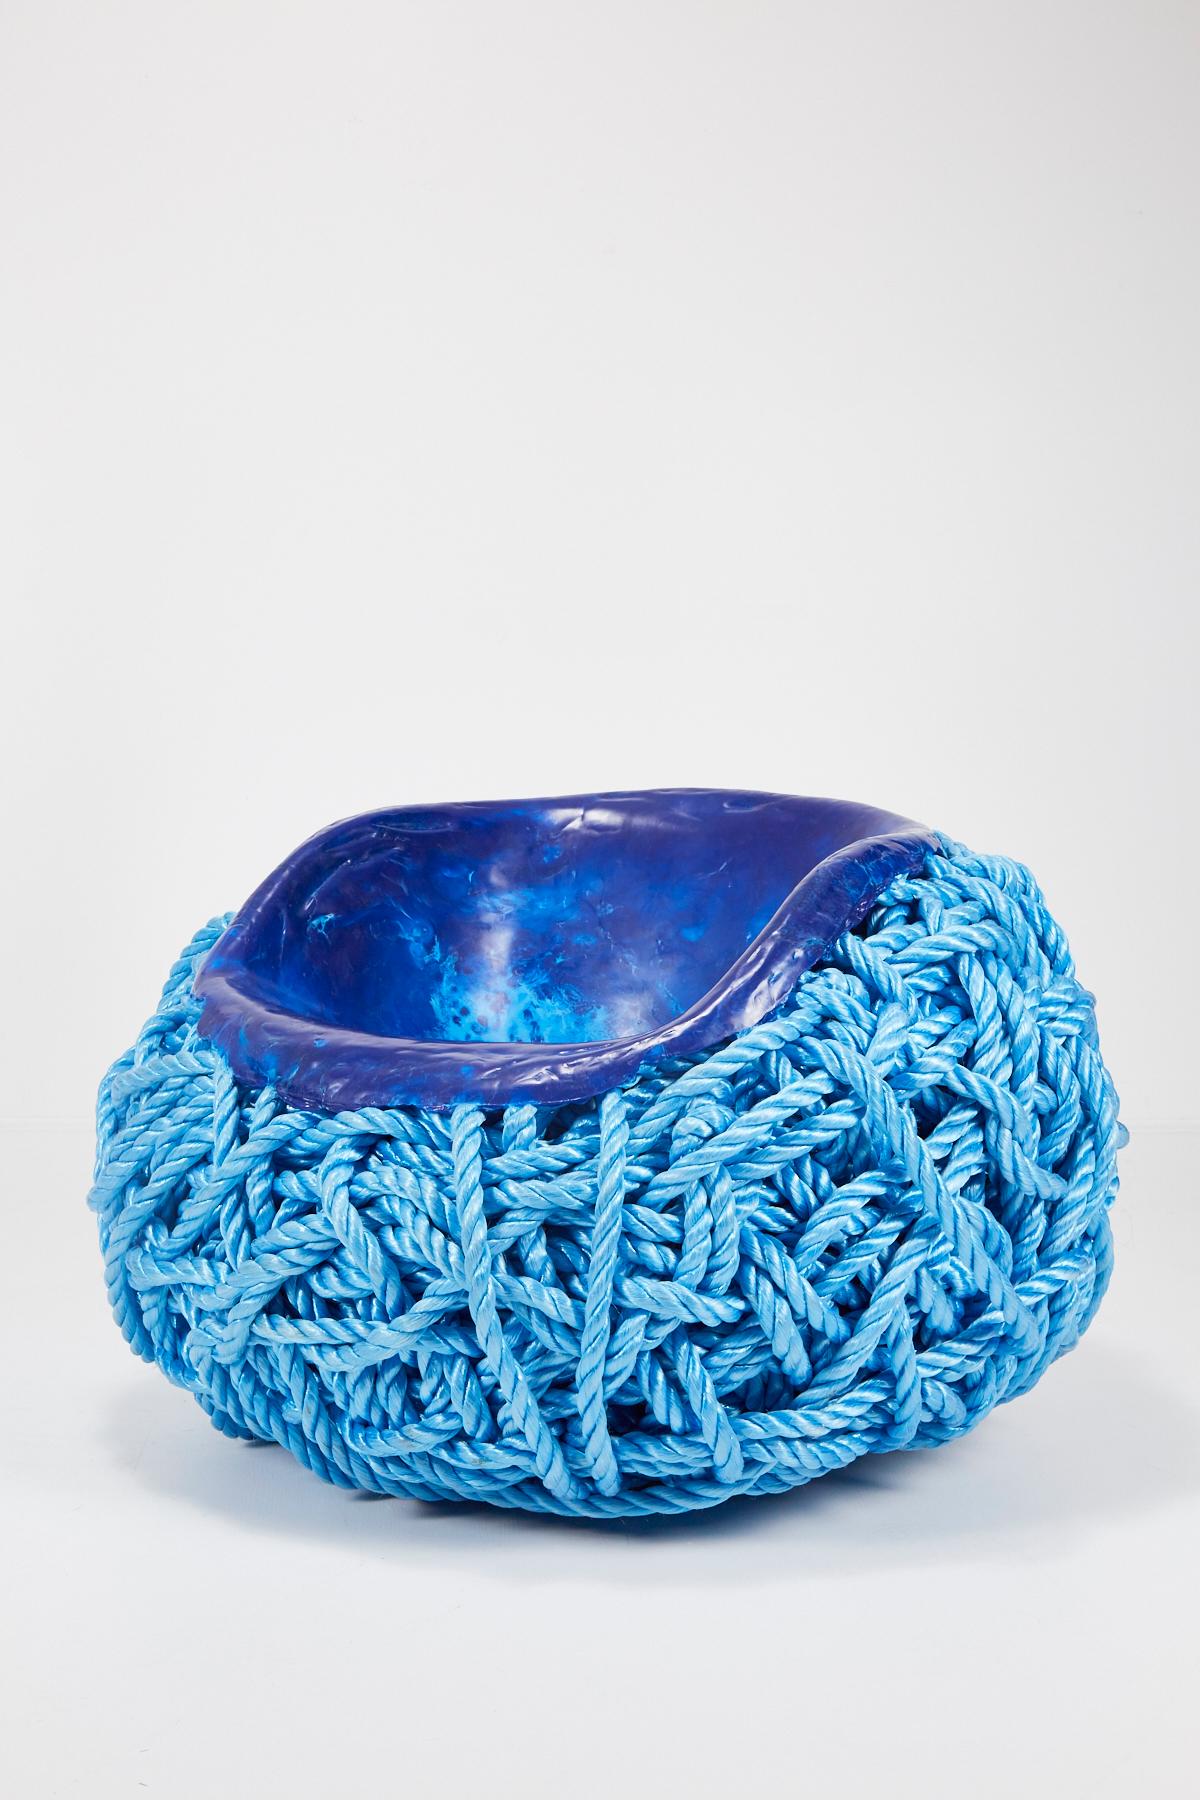 Contemporary Meltdown Chair PP Rope Blue Chair by Tom Price, 2017 For Sale